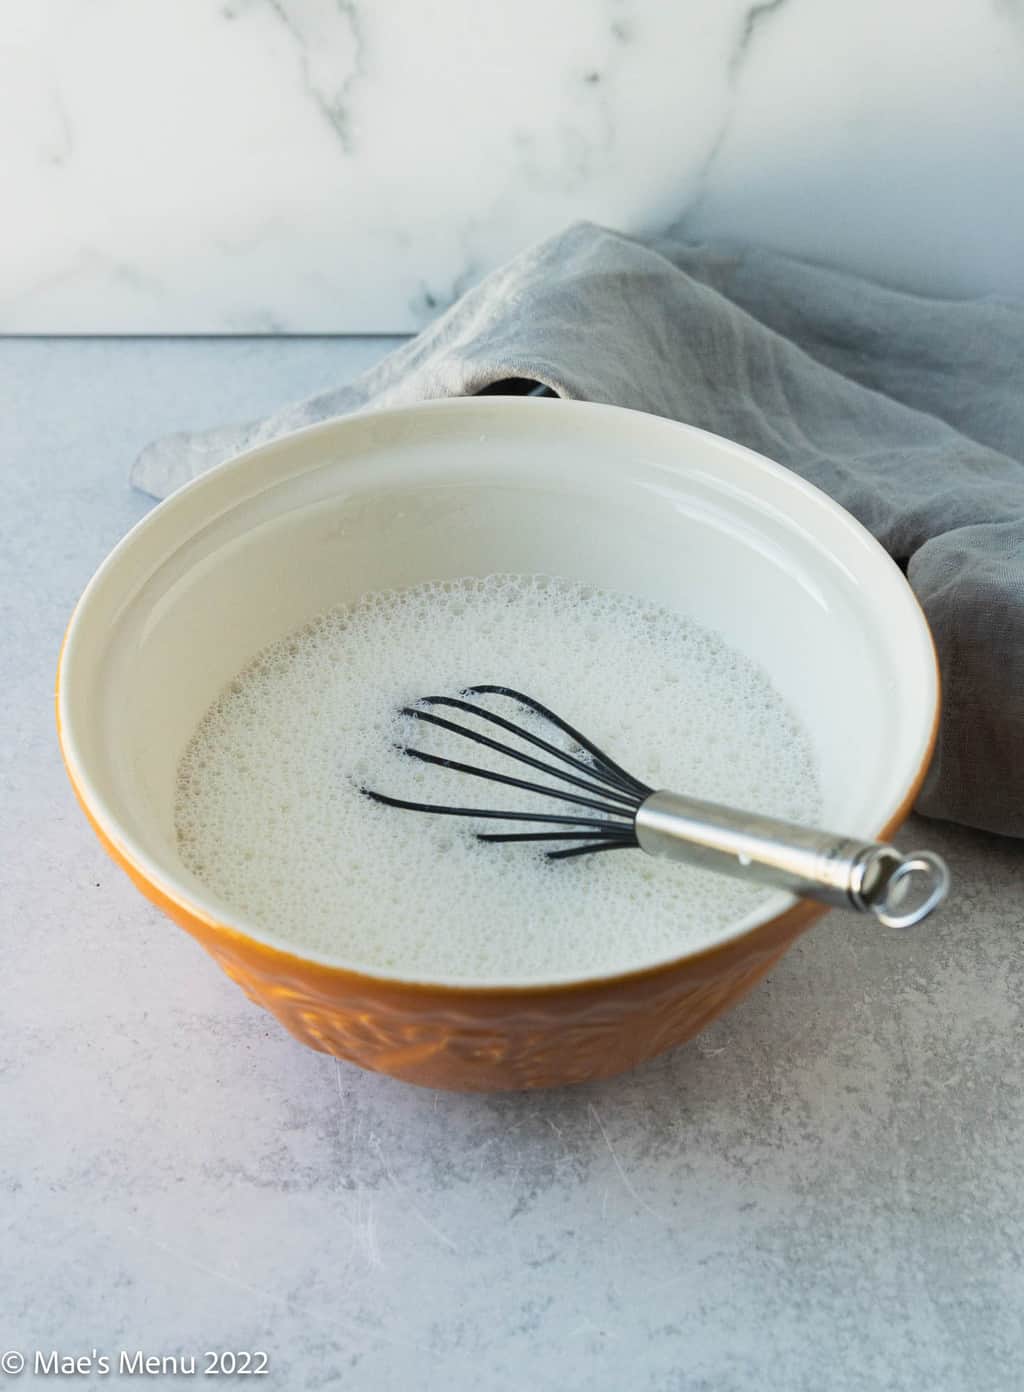 A side shot of a mixing bowl of frothy milk and a whisk.